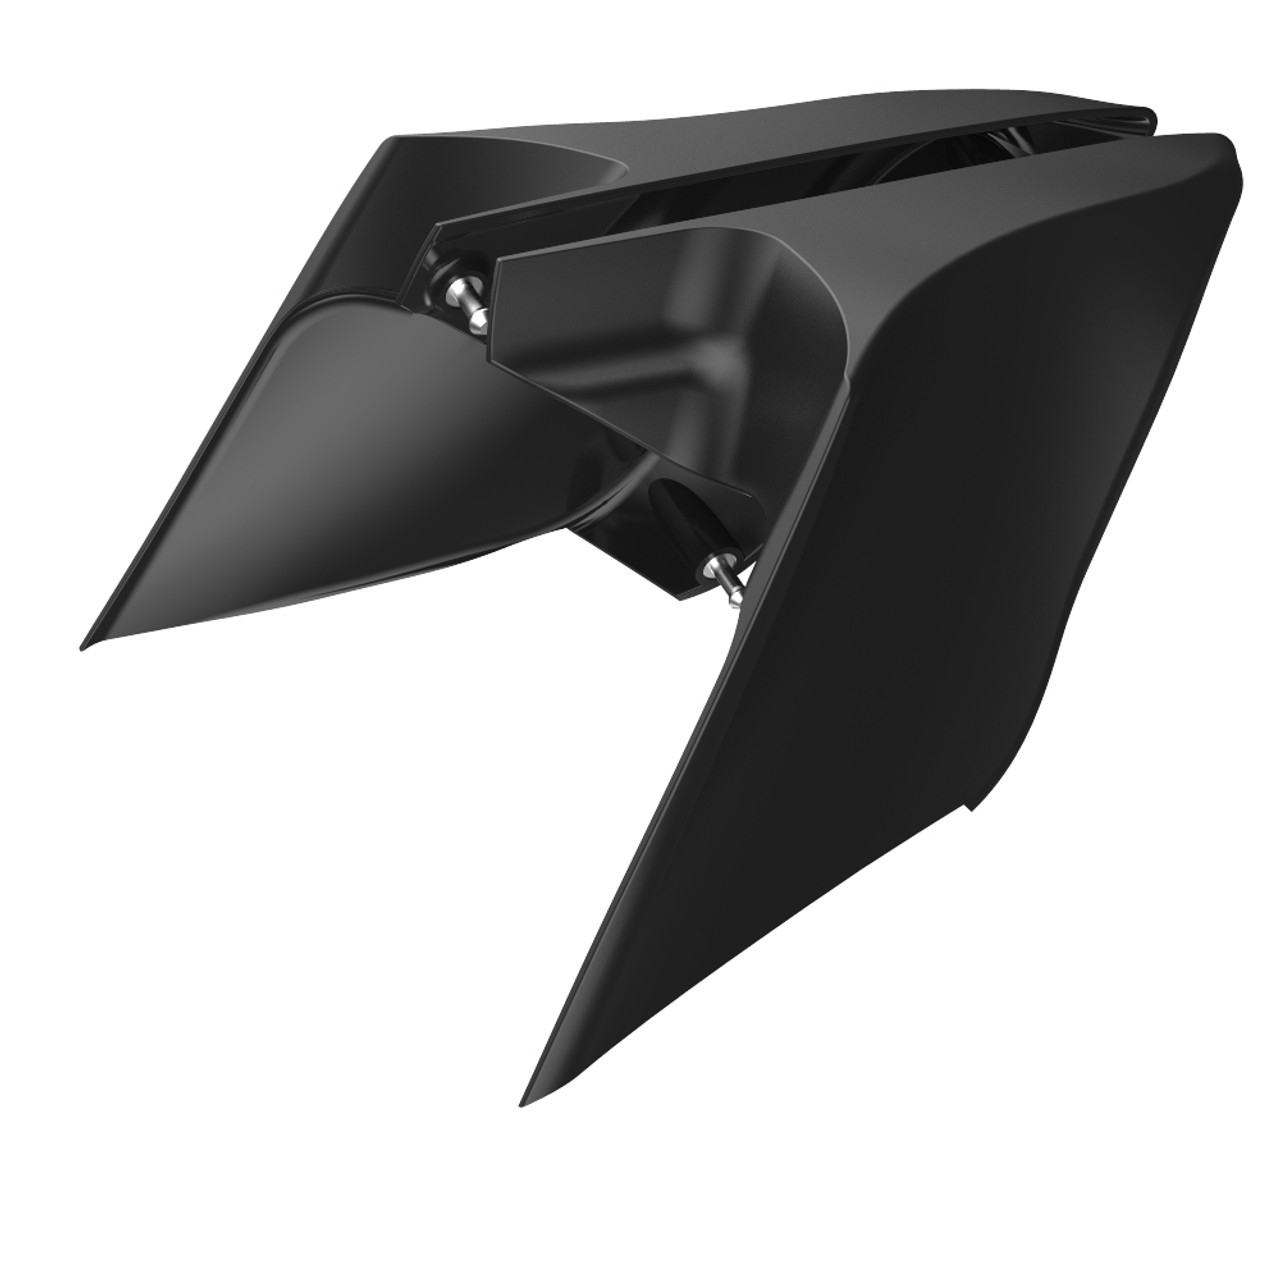 ABS CVO Style Stretched Side Cover for 2014+ Harley Davidson Touring